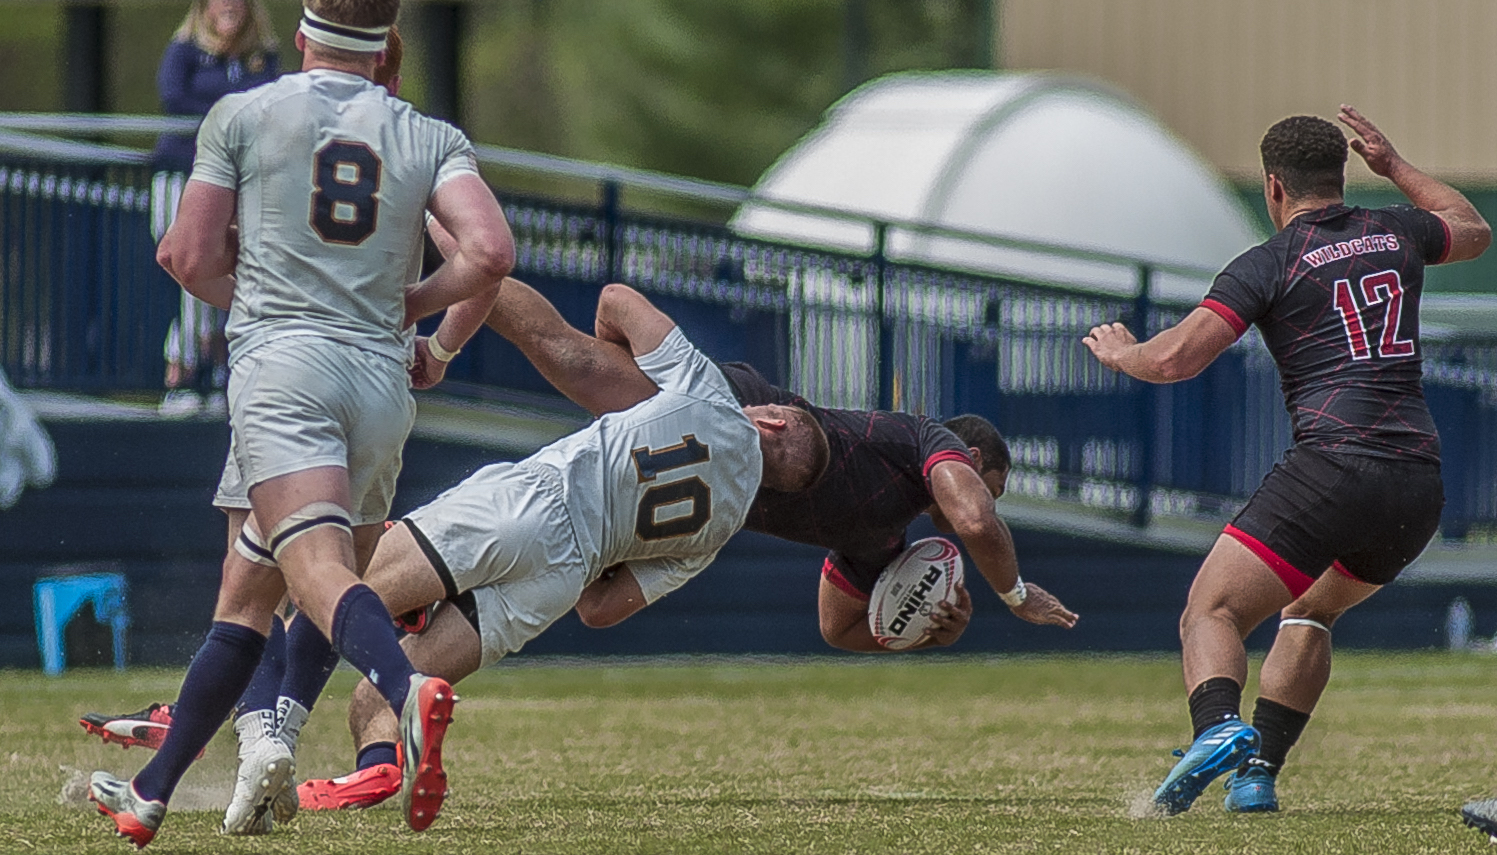 Navy v CWU rugby April 15 2017. Colleen McCloskey photo for Goff Rugby Report.